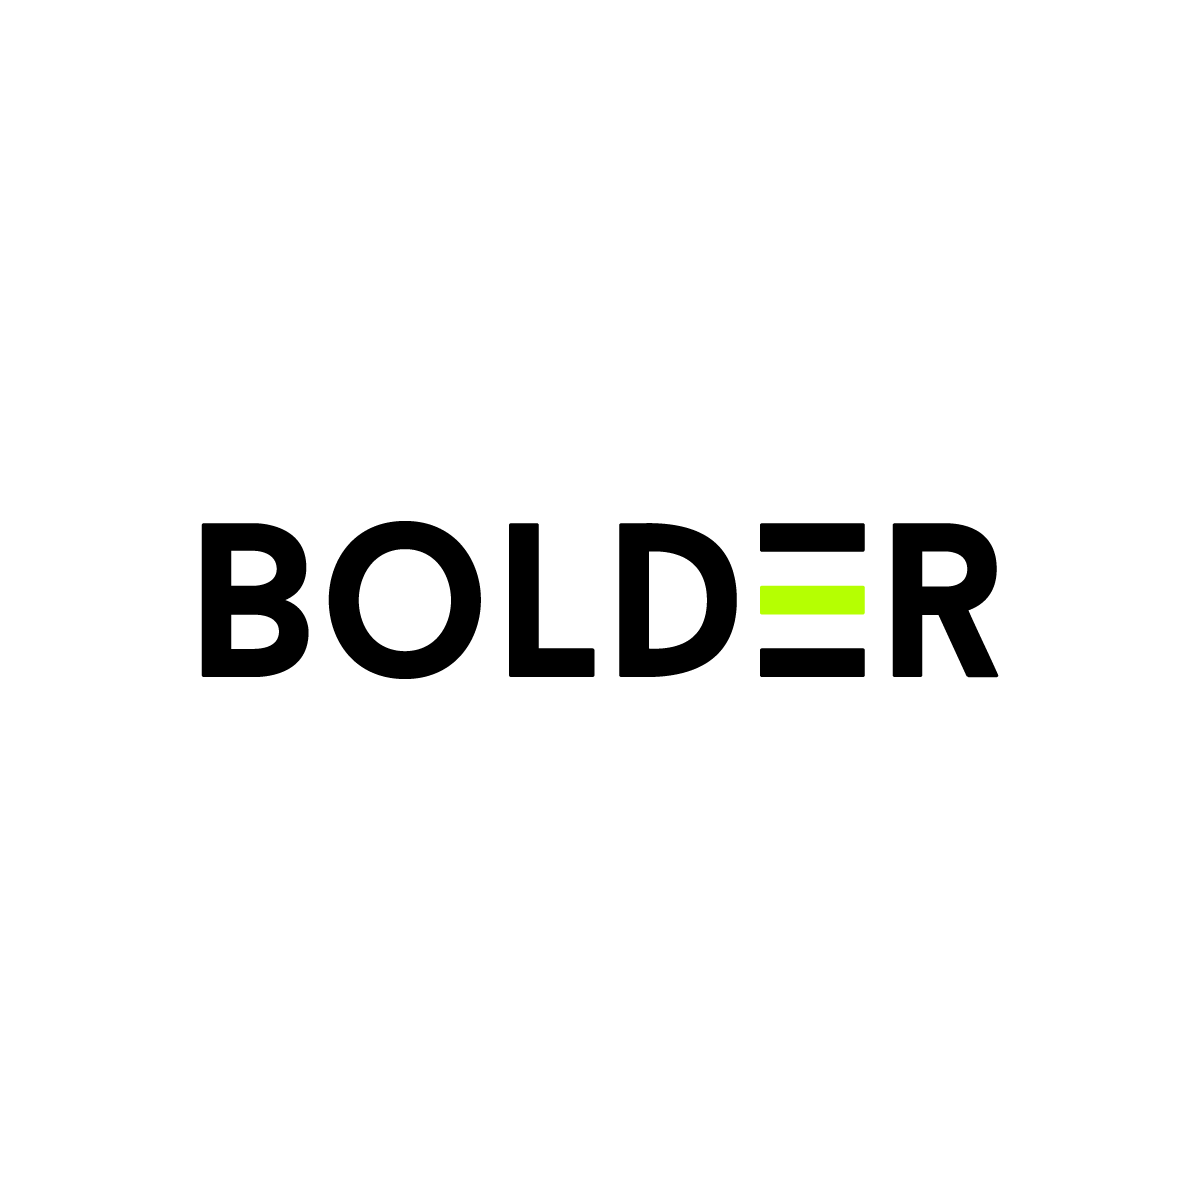 The Bolder for Shopify